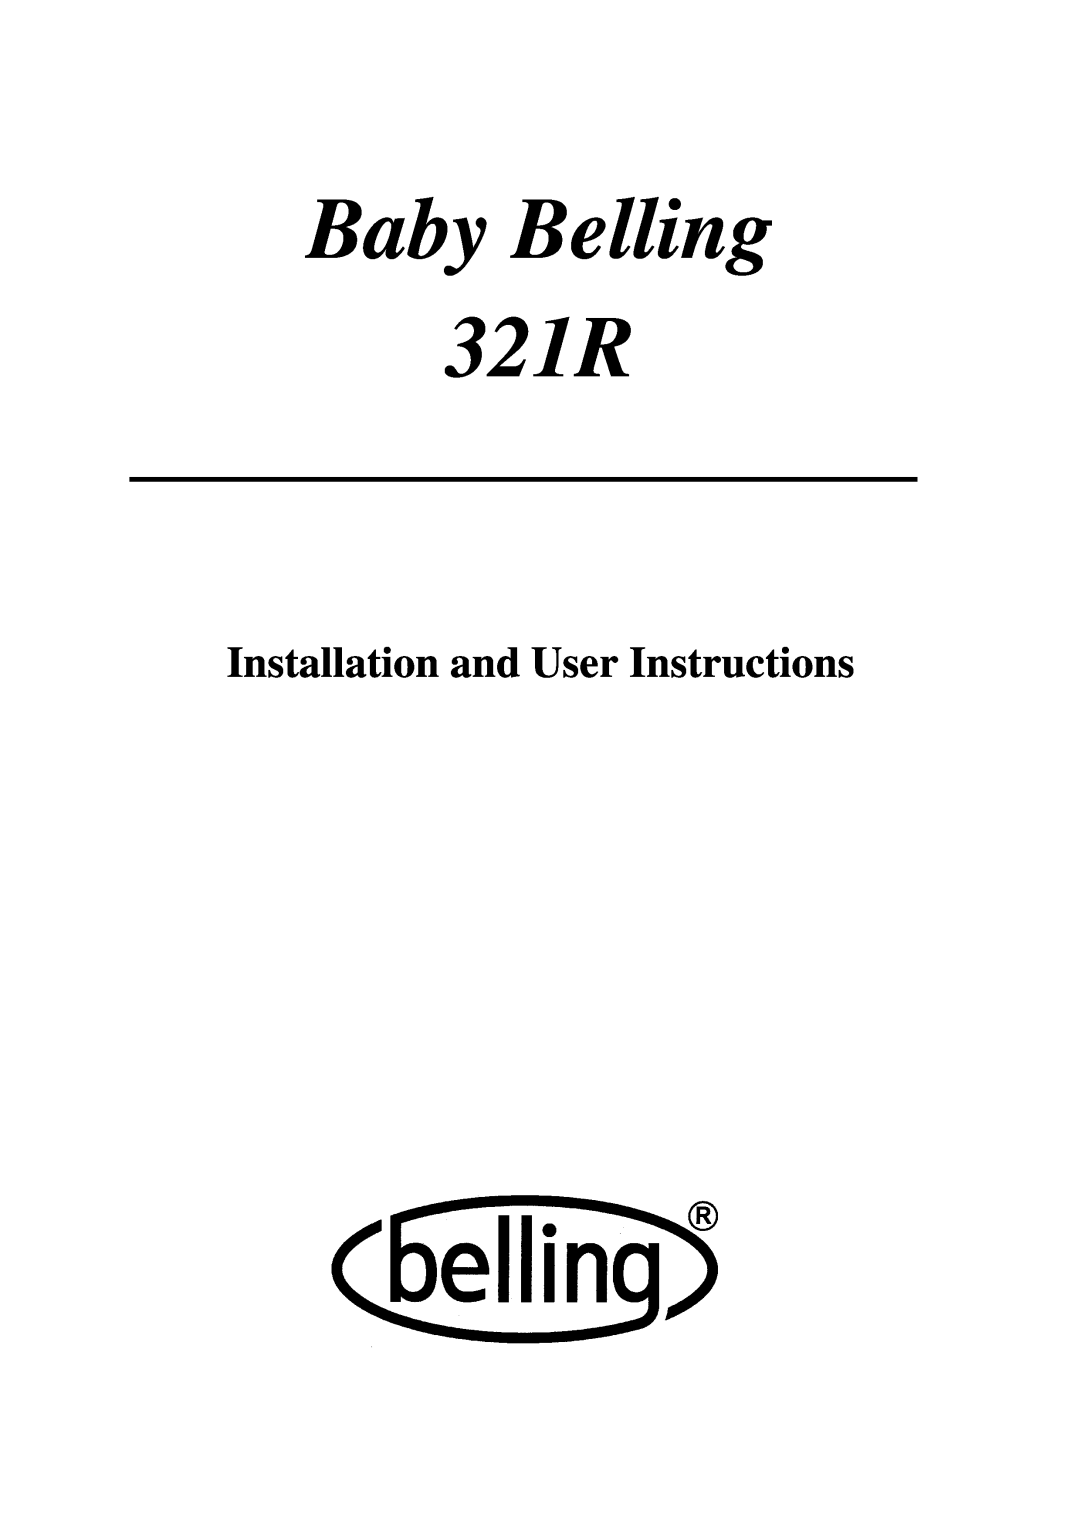 Glen Dimplex Home Appliances Ltd manual Baby Belling 321R, Installation and User Instructions 